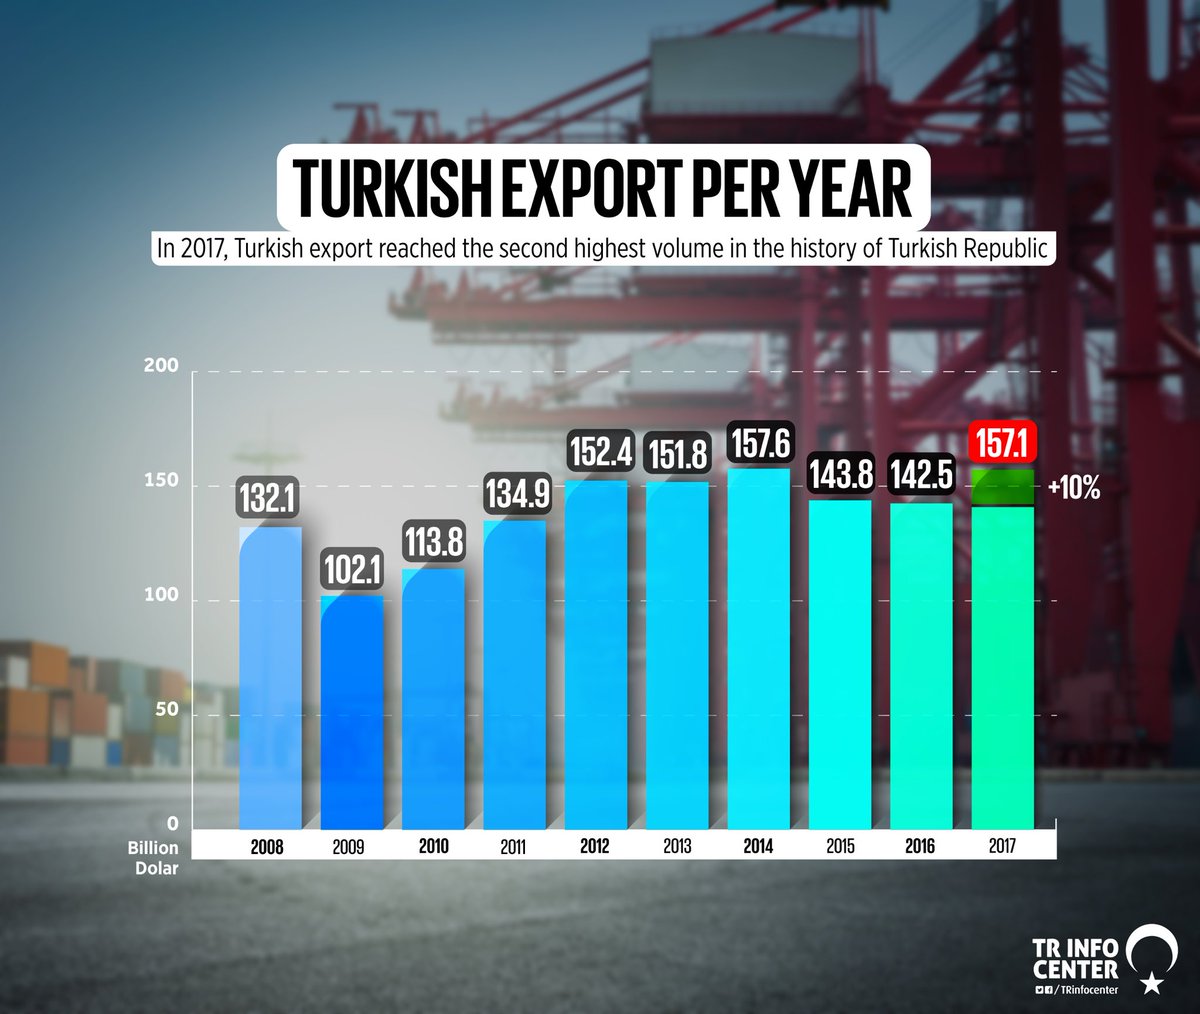 Turkish export in numbers per year